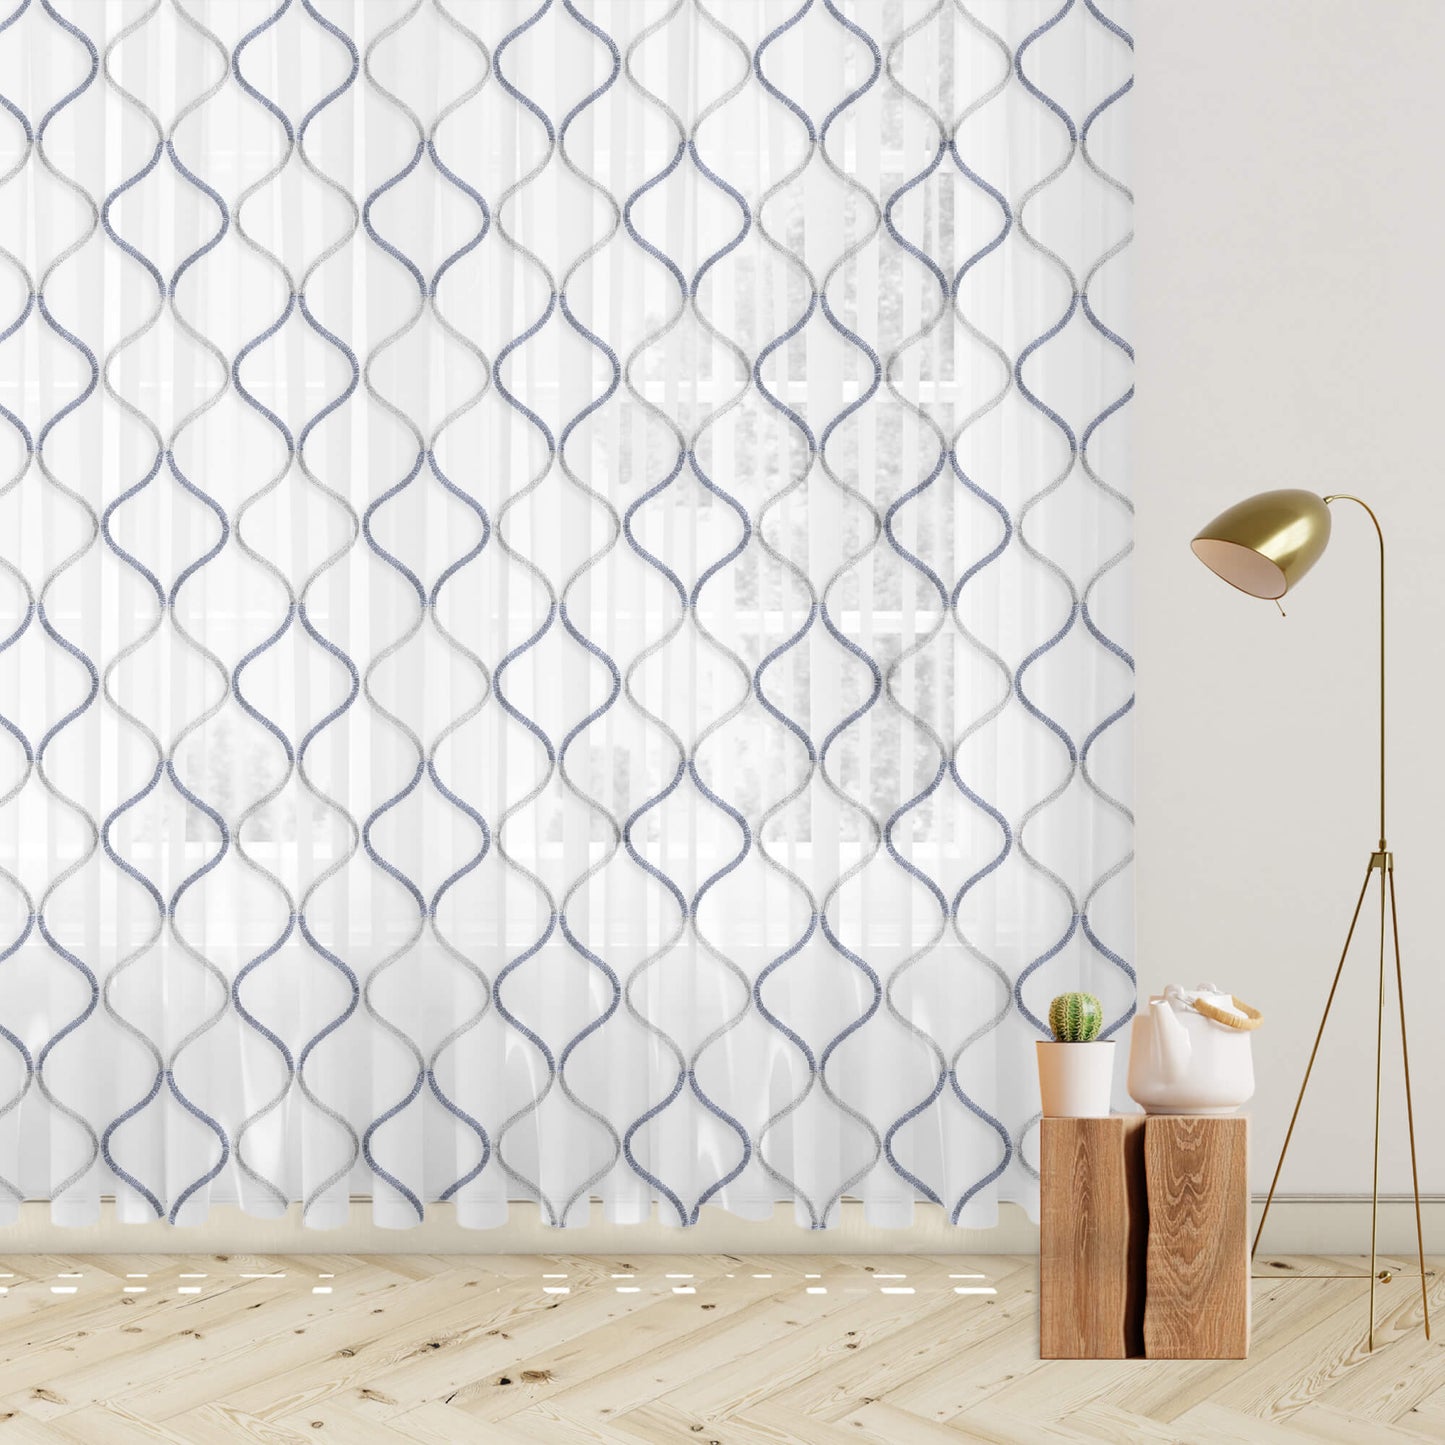 White And Slate Grey Trellis Pattern Embroidery Organza Tissue Premium Sheer Fabric (Width 48 Inches)